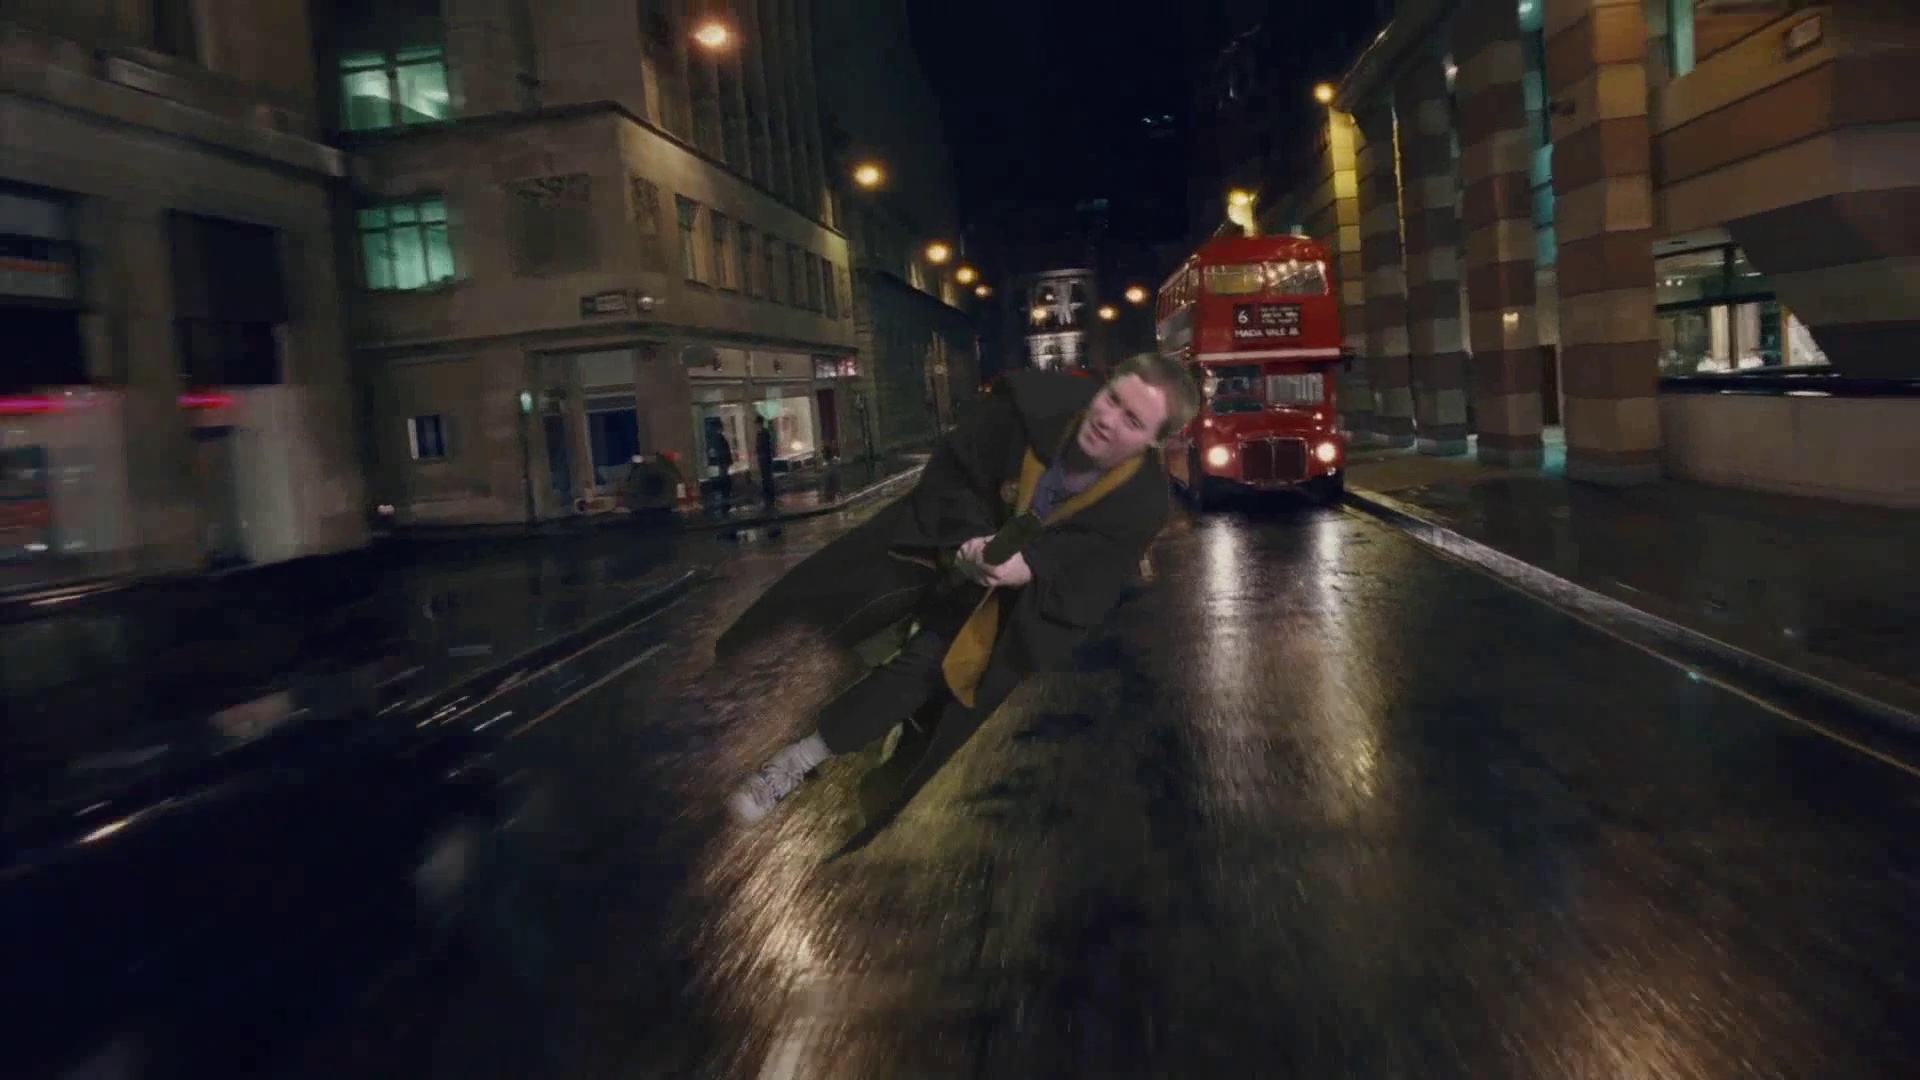 Glen in a brown robe flying on a broomstick, down the middle of a busy London road at night, with a red London bus in the background.